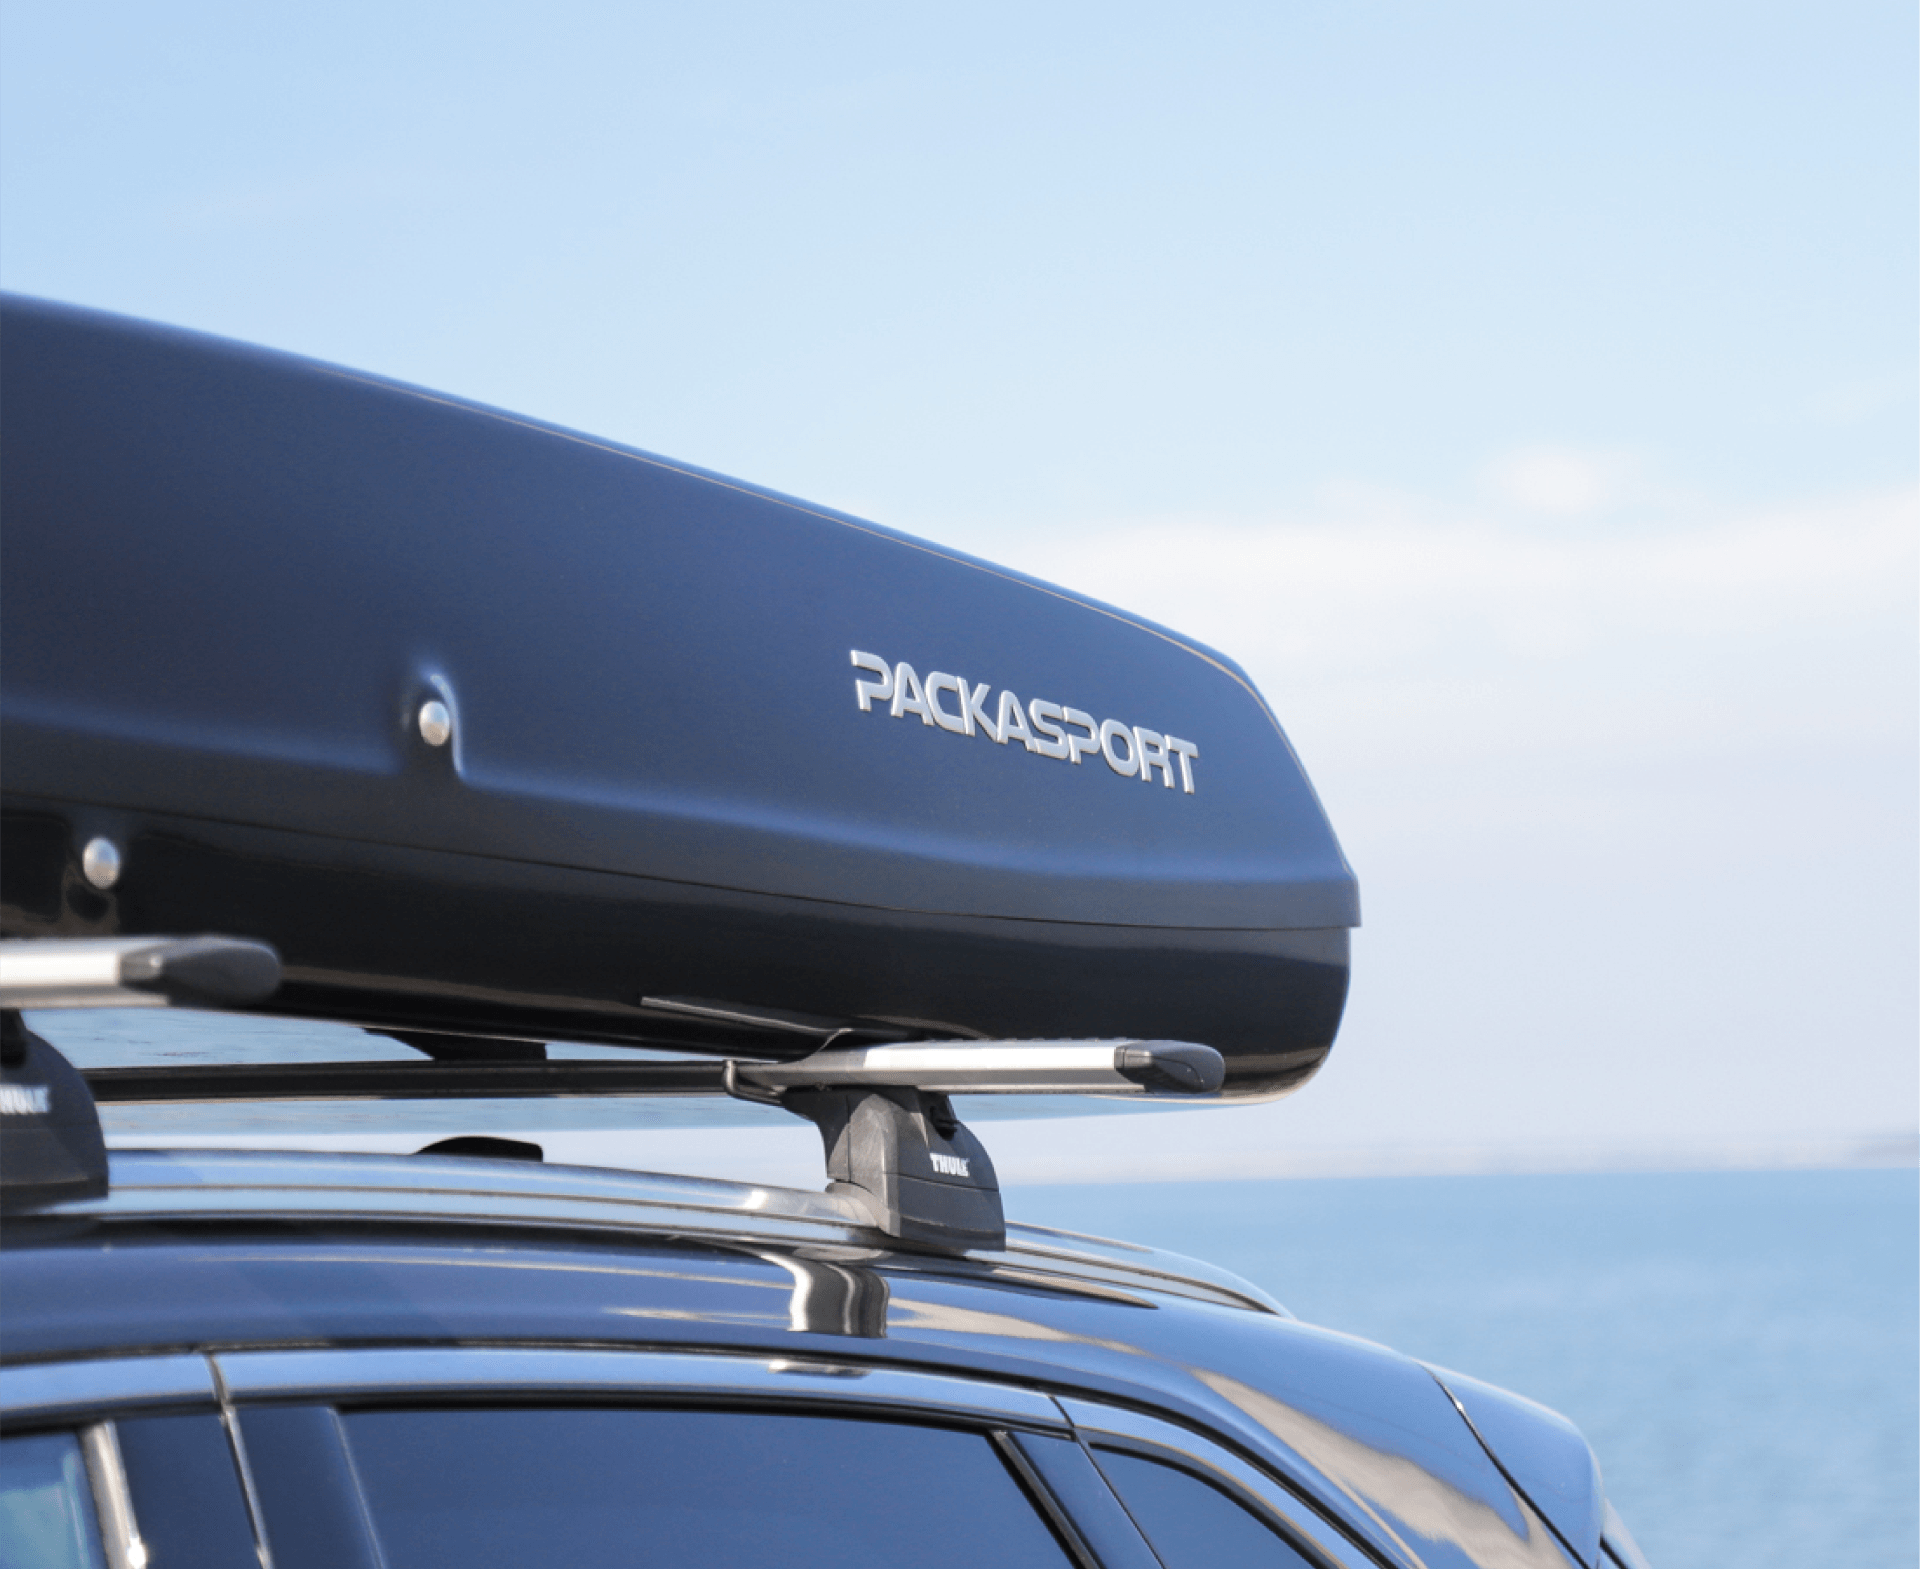 Packasport Rooftop Cargo Box with the word Packasport on it